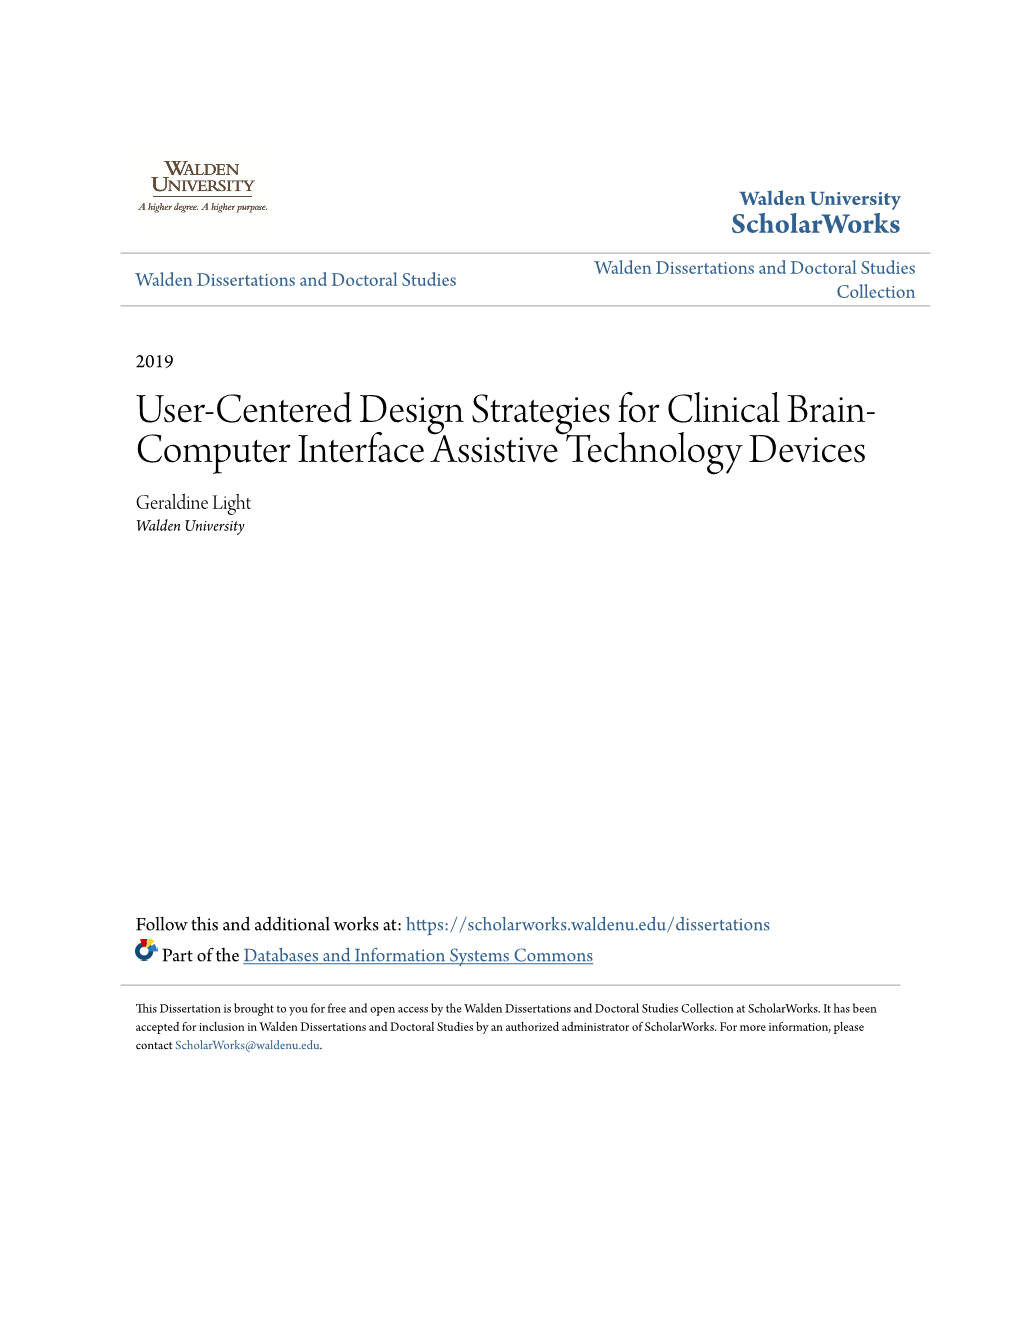 User-Centered Design Strategies for Clinical Brain-Computer Interface